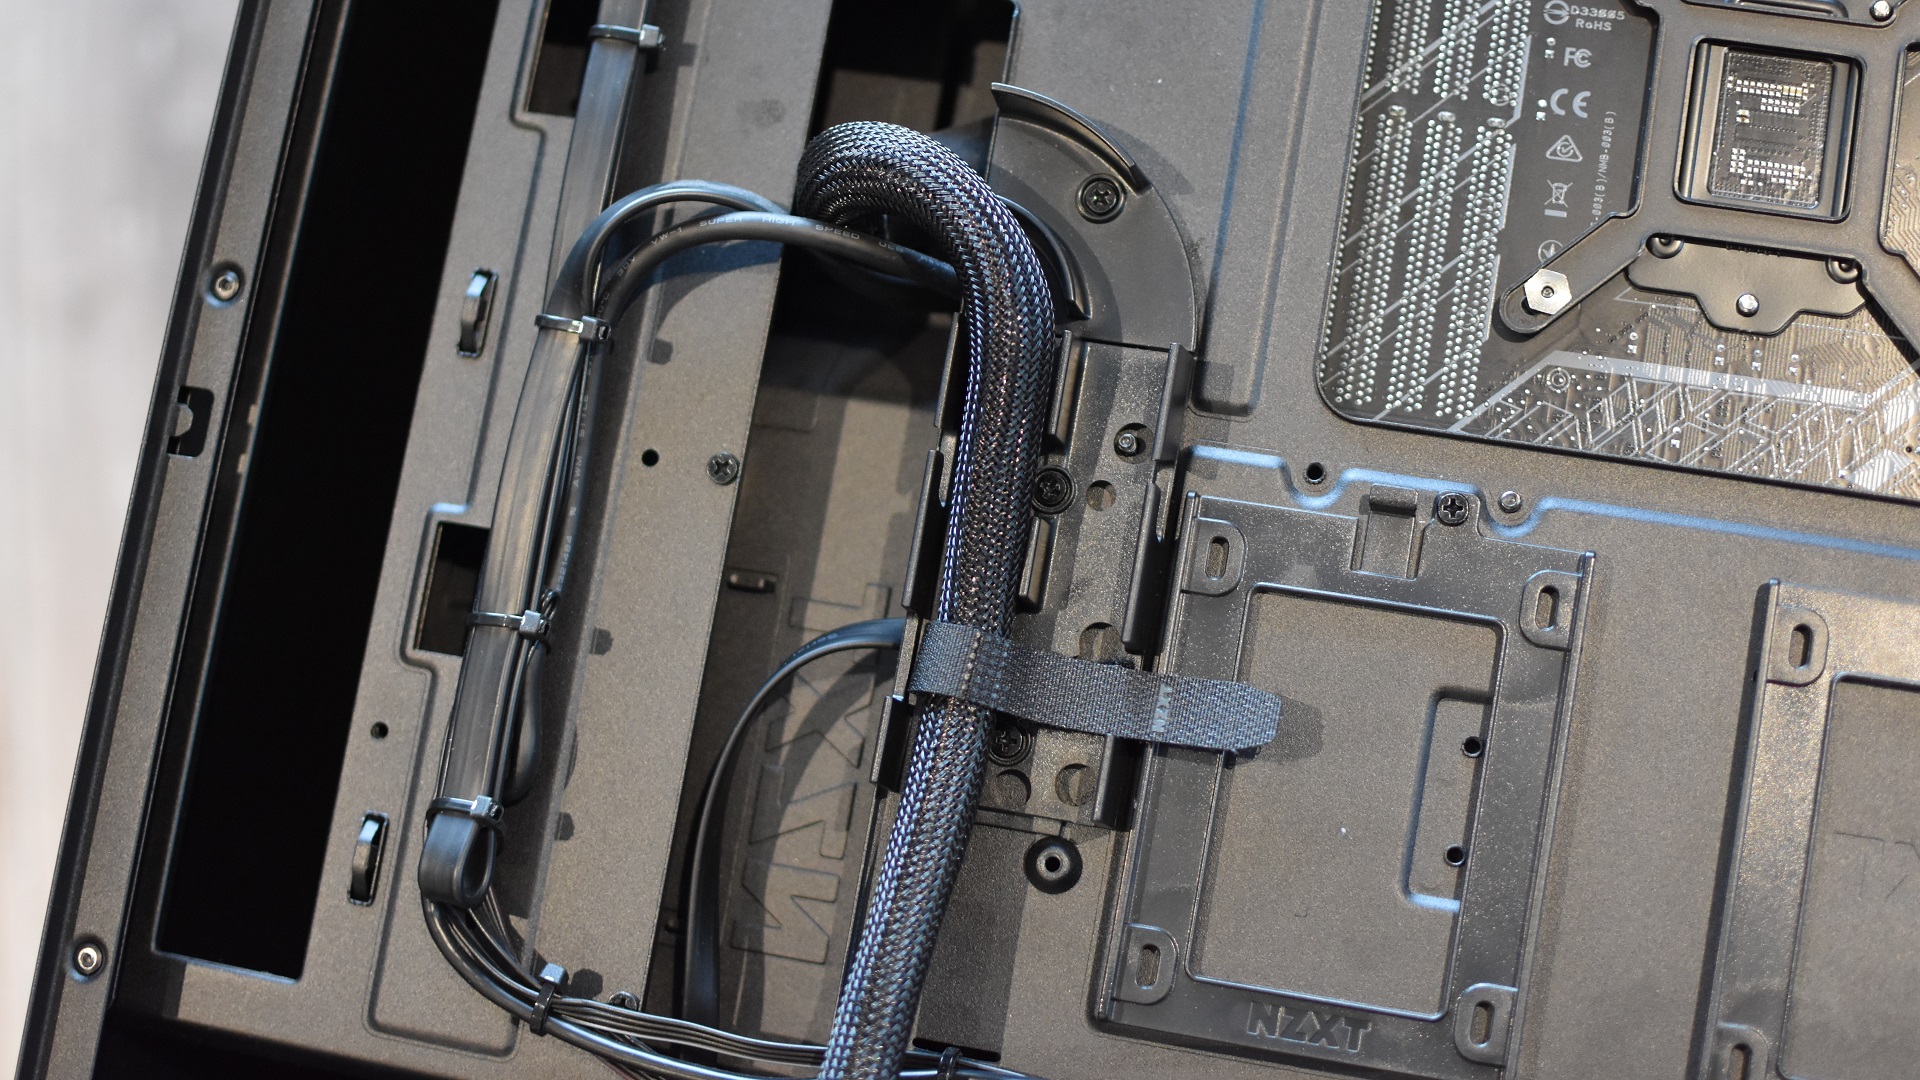 The cable routing channels inside a gaming PC case.